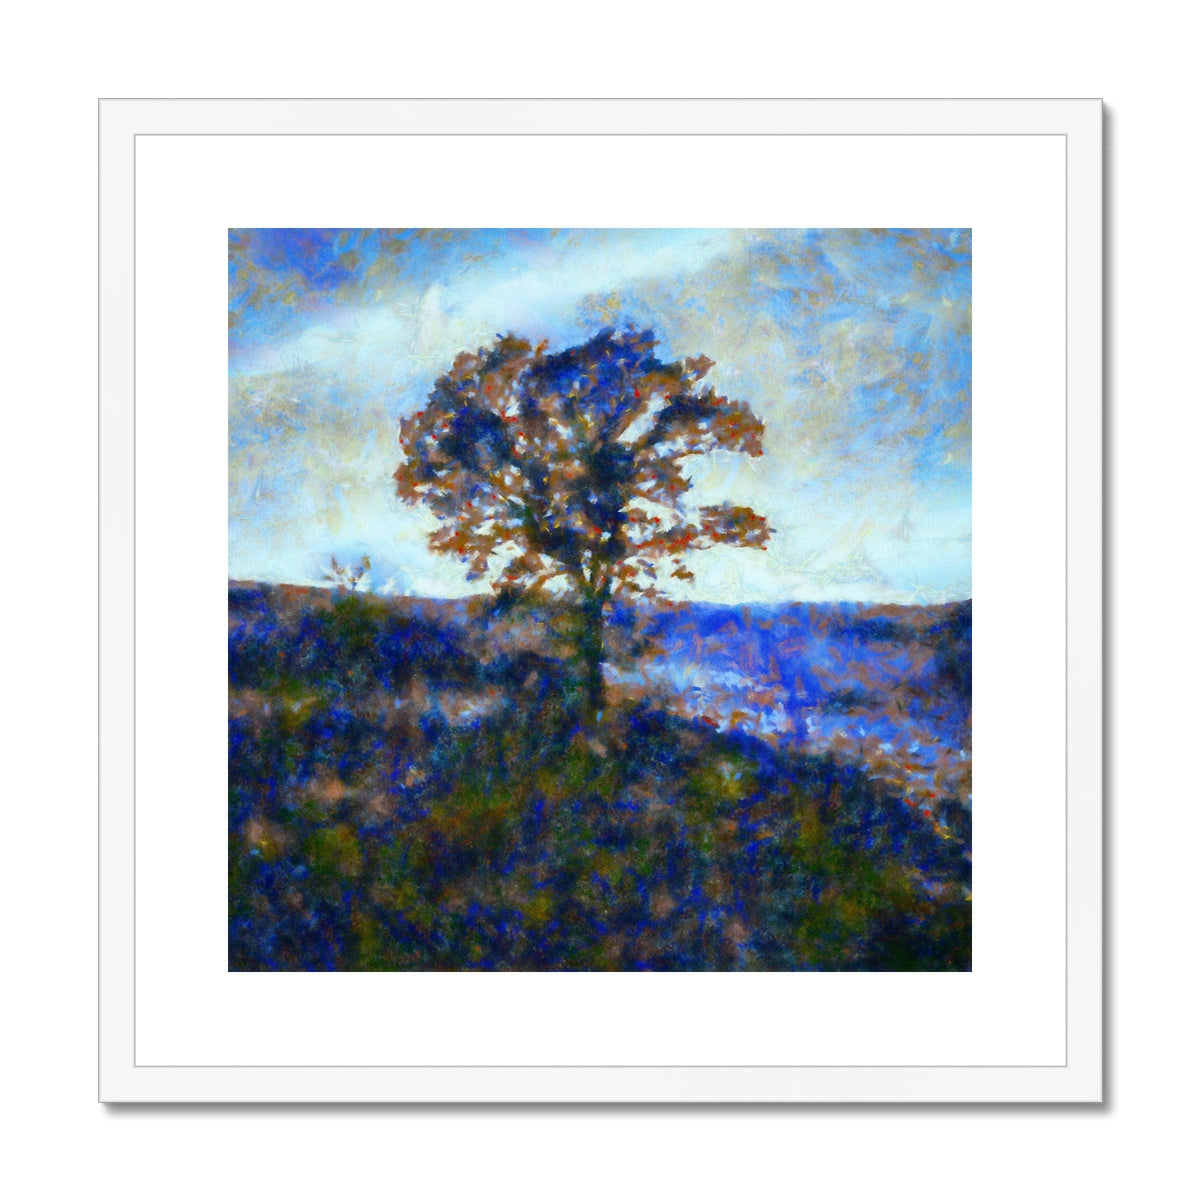 A Winter Highland Tree Painting | Framed & Mounted Prints From Scotland-Framed & Mounted Prints-Scottish Highlands & Lowlands Art Gallery-20"x20"-White Frame-Paintings, Prints, Homeware, Art Gifts From Scotland By Scottish Artist Kevin Hunter